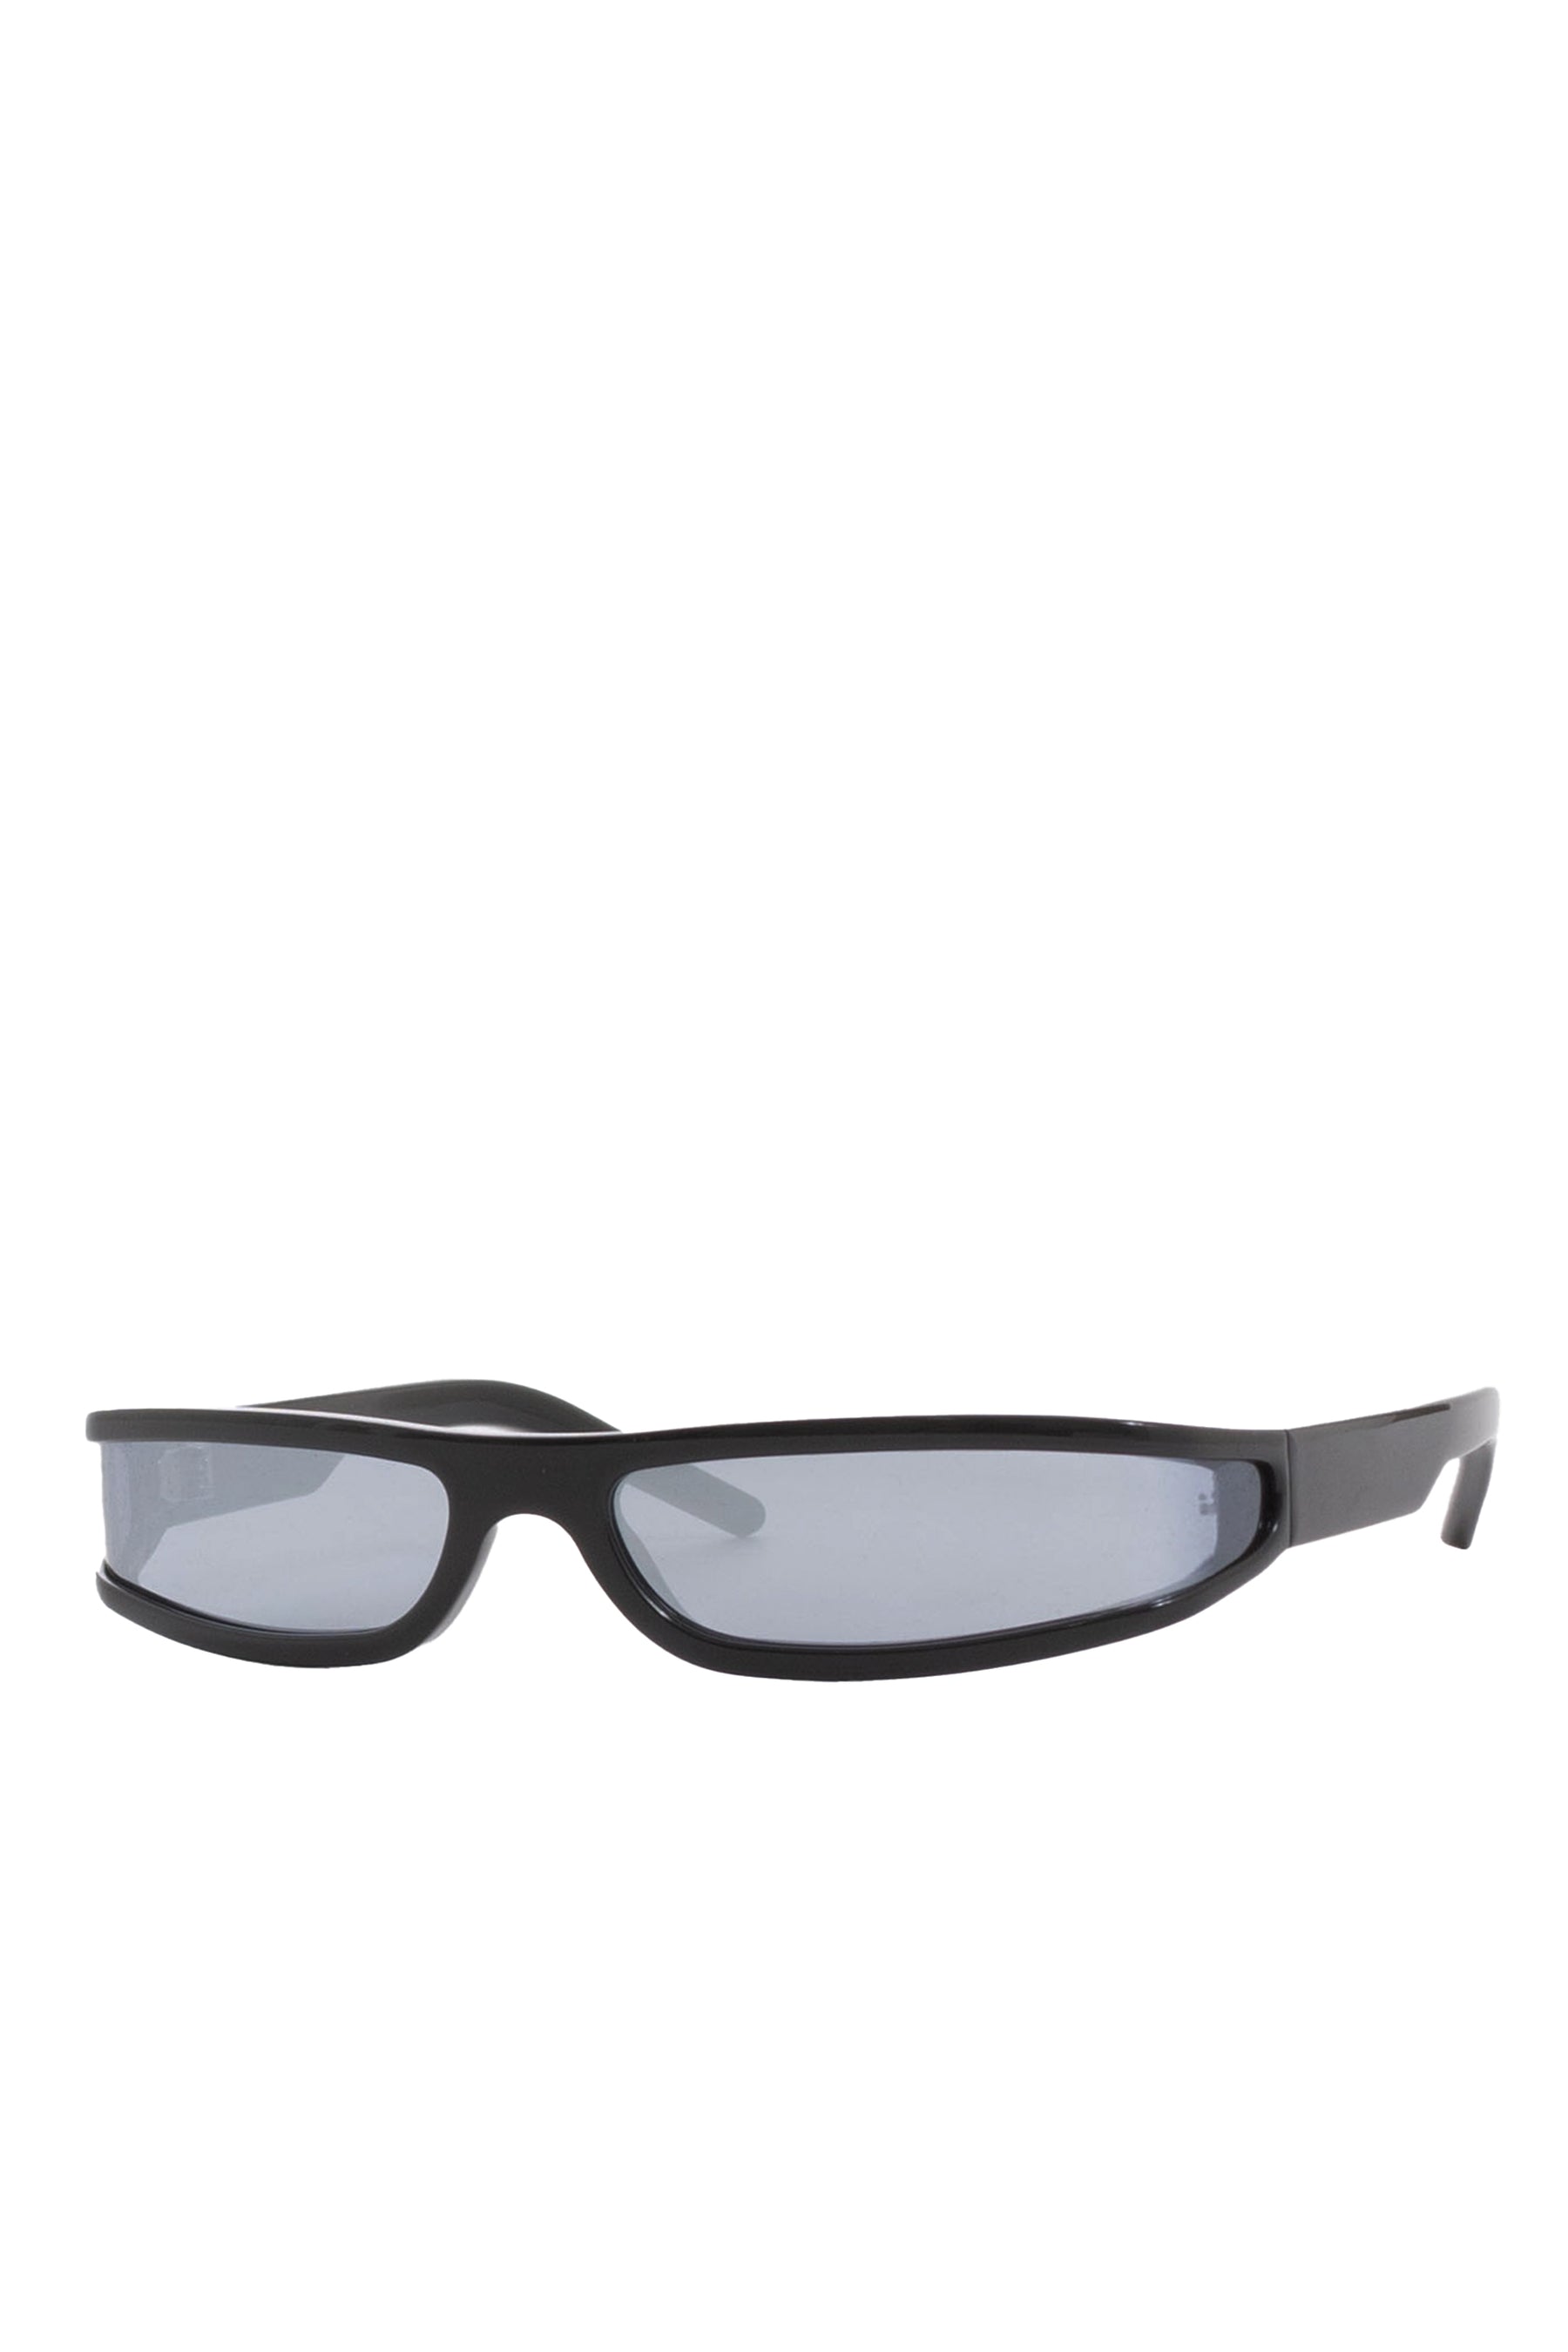 Pancho Other plastic material Rectangle glasses for women and men